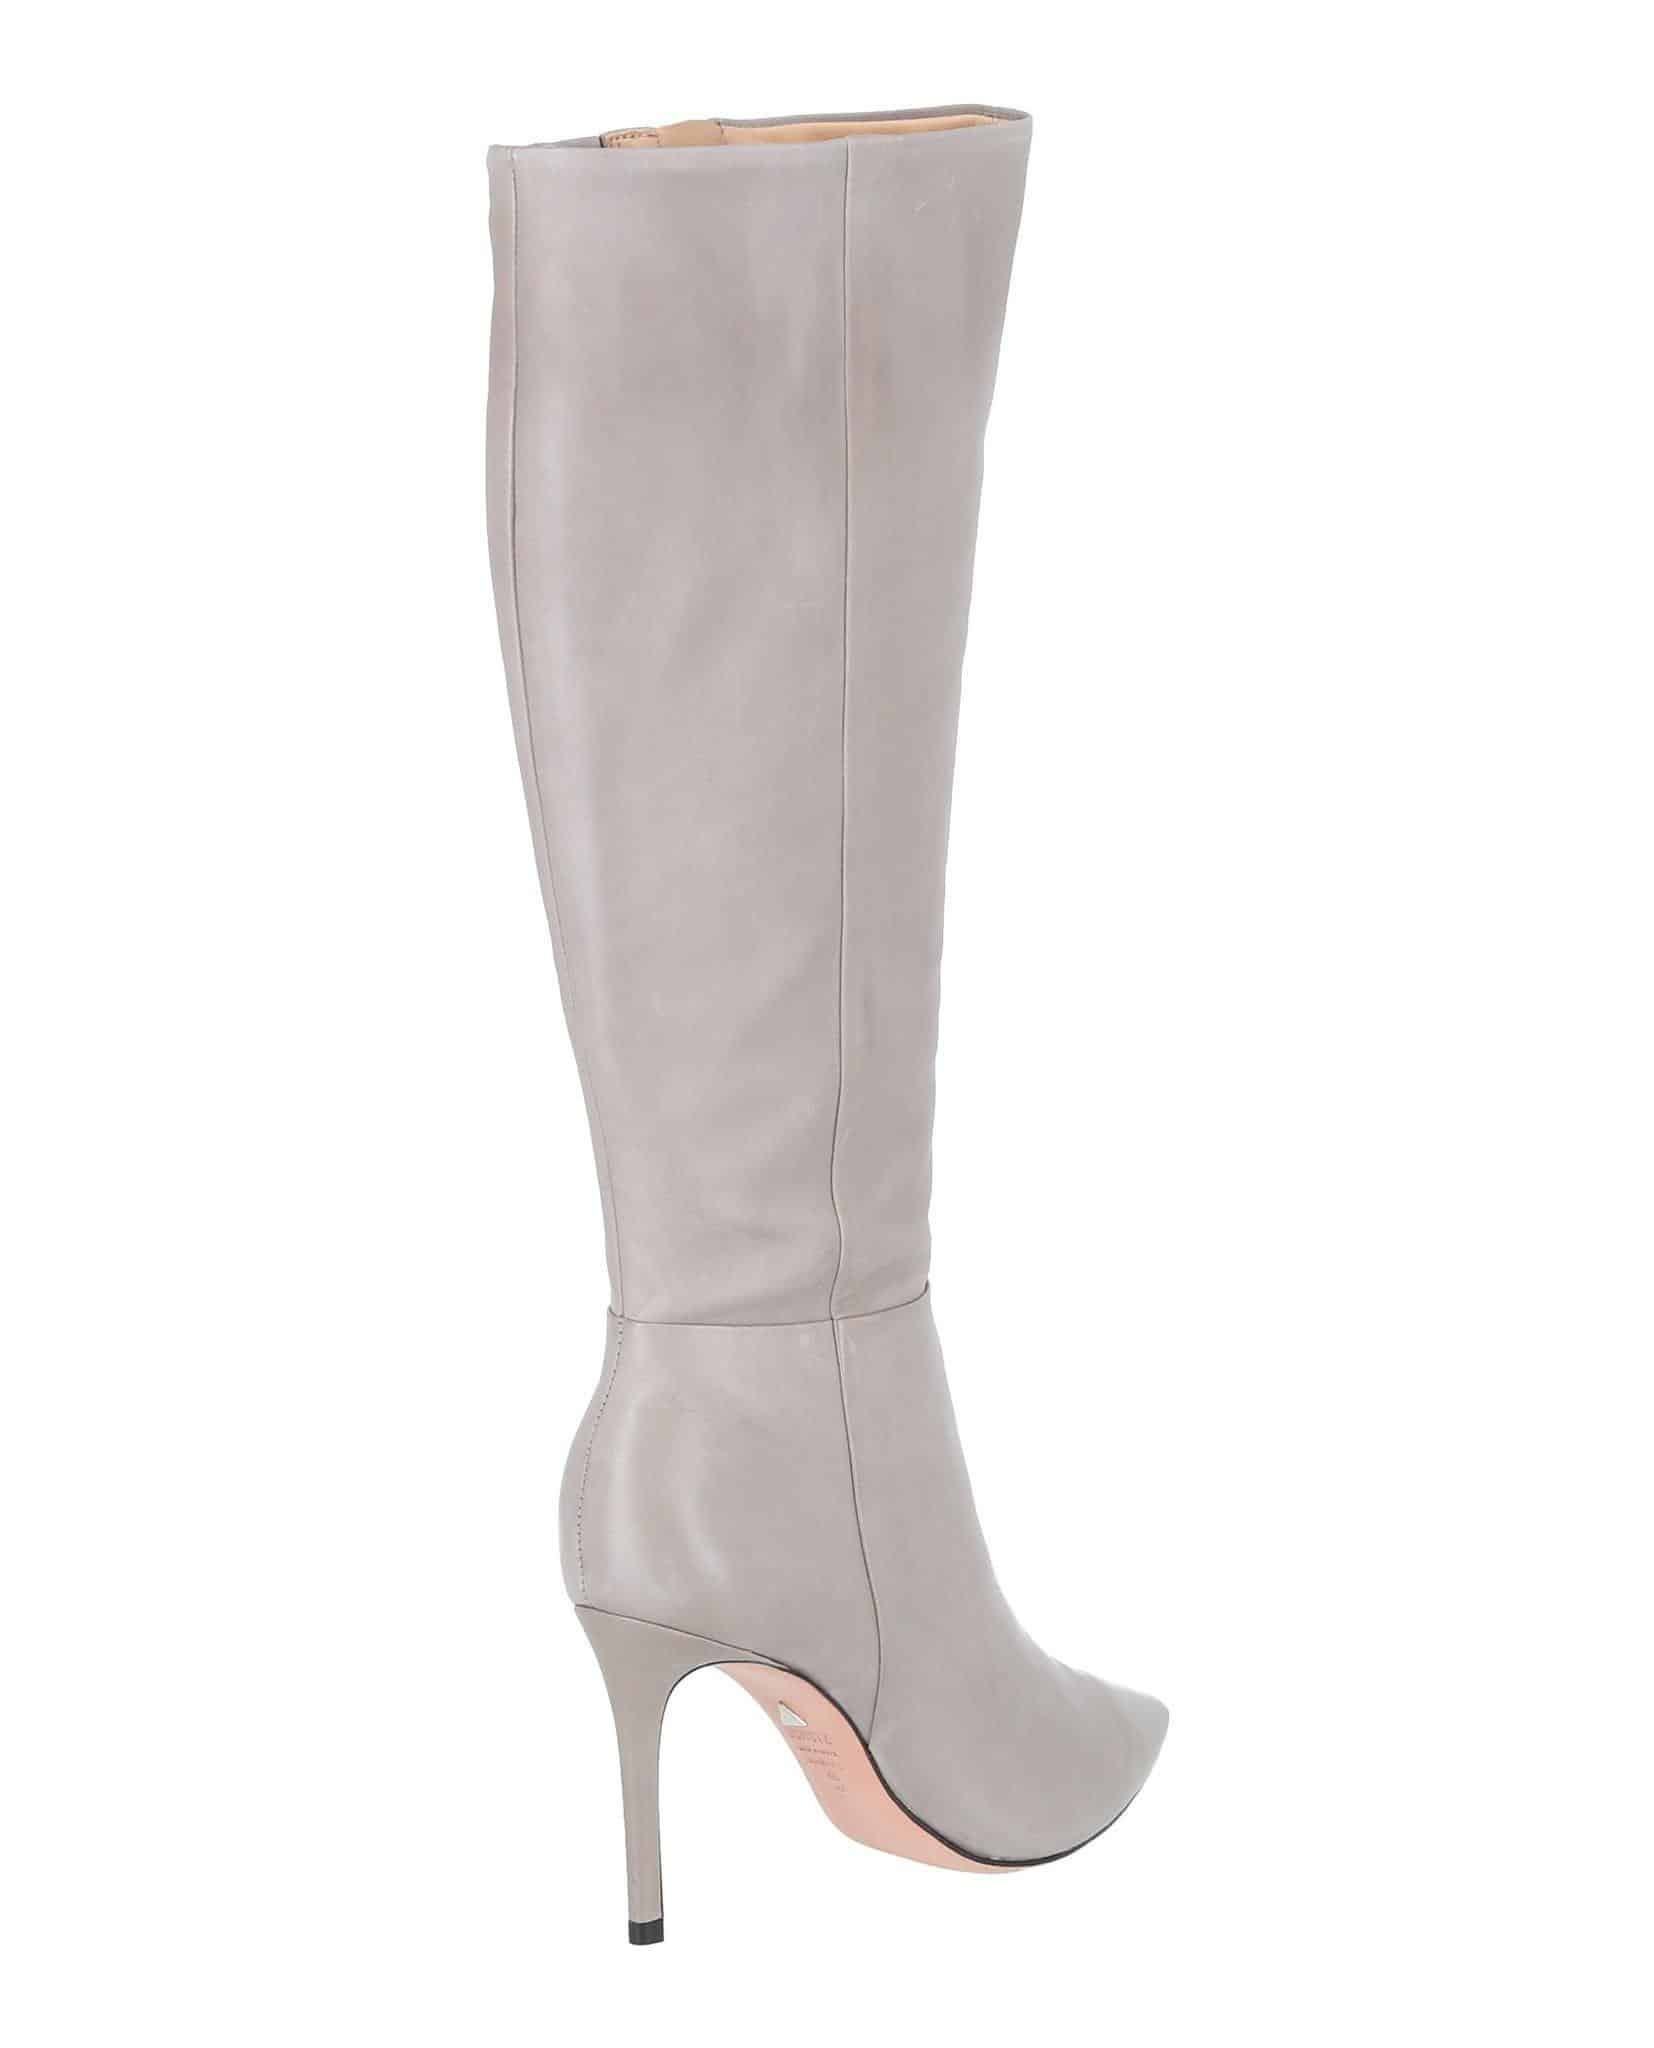 Schutz Magalli Leather Knee High Boots in Gray